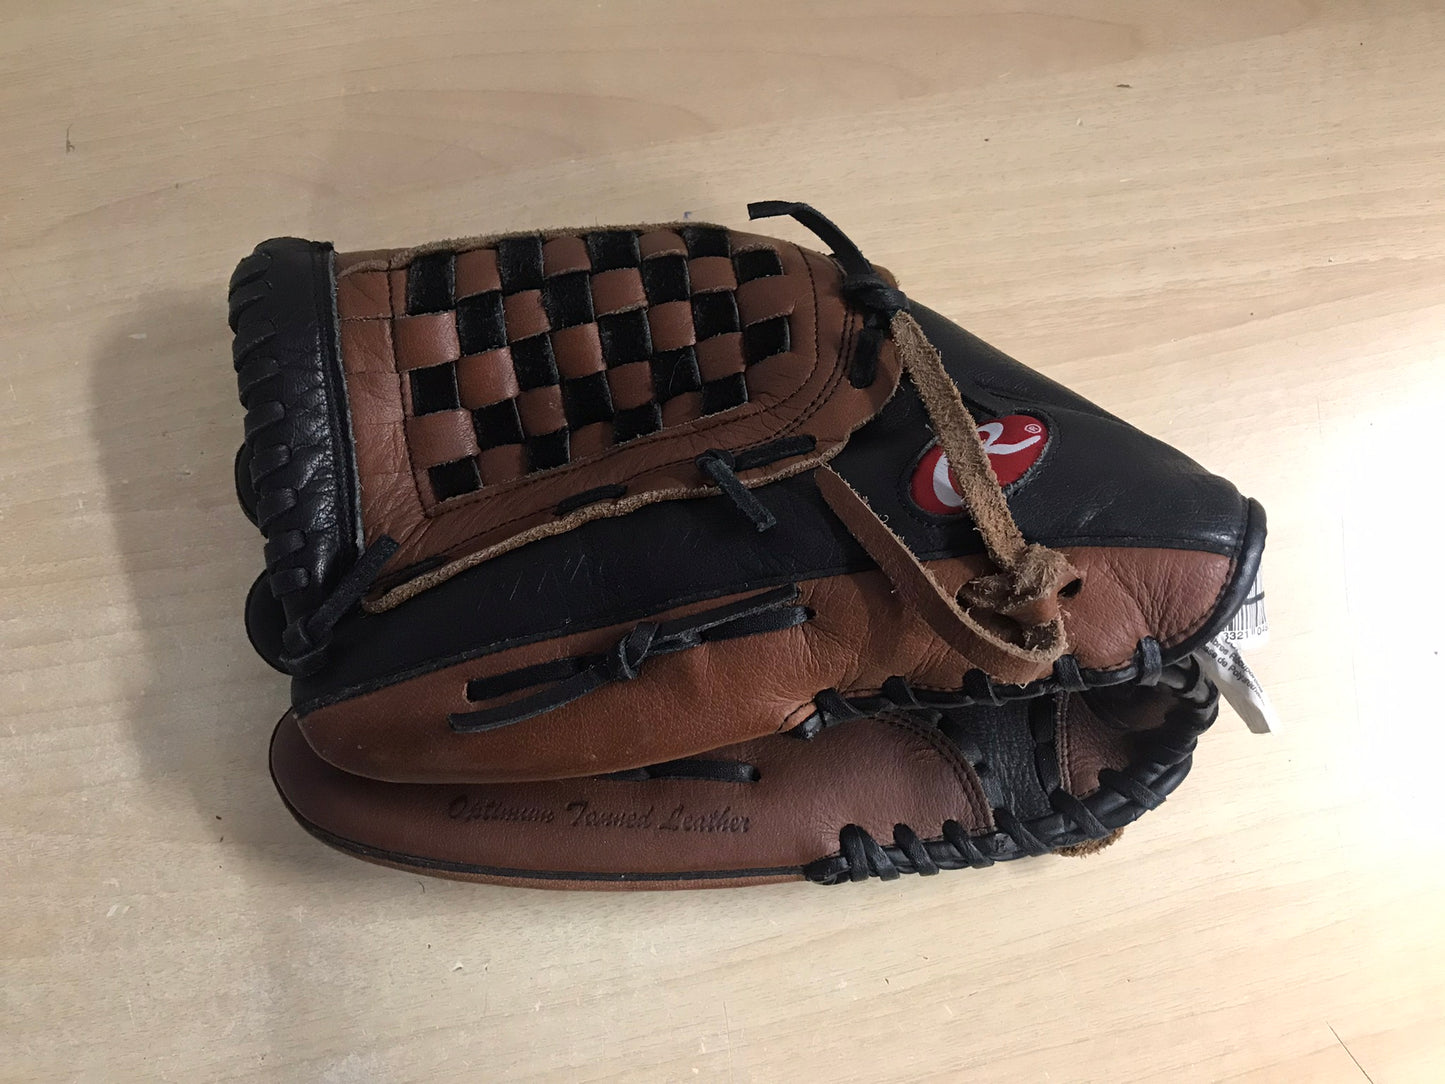 Baseball Glove Adult Size 13 inch Rawlings Black Brown All Leather Fits RIGHT Hand New Demo Model